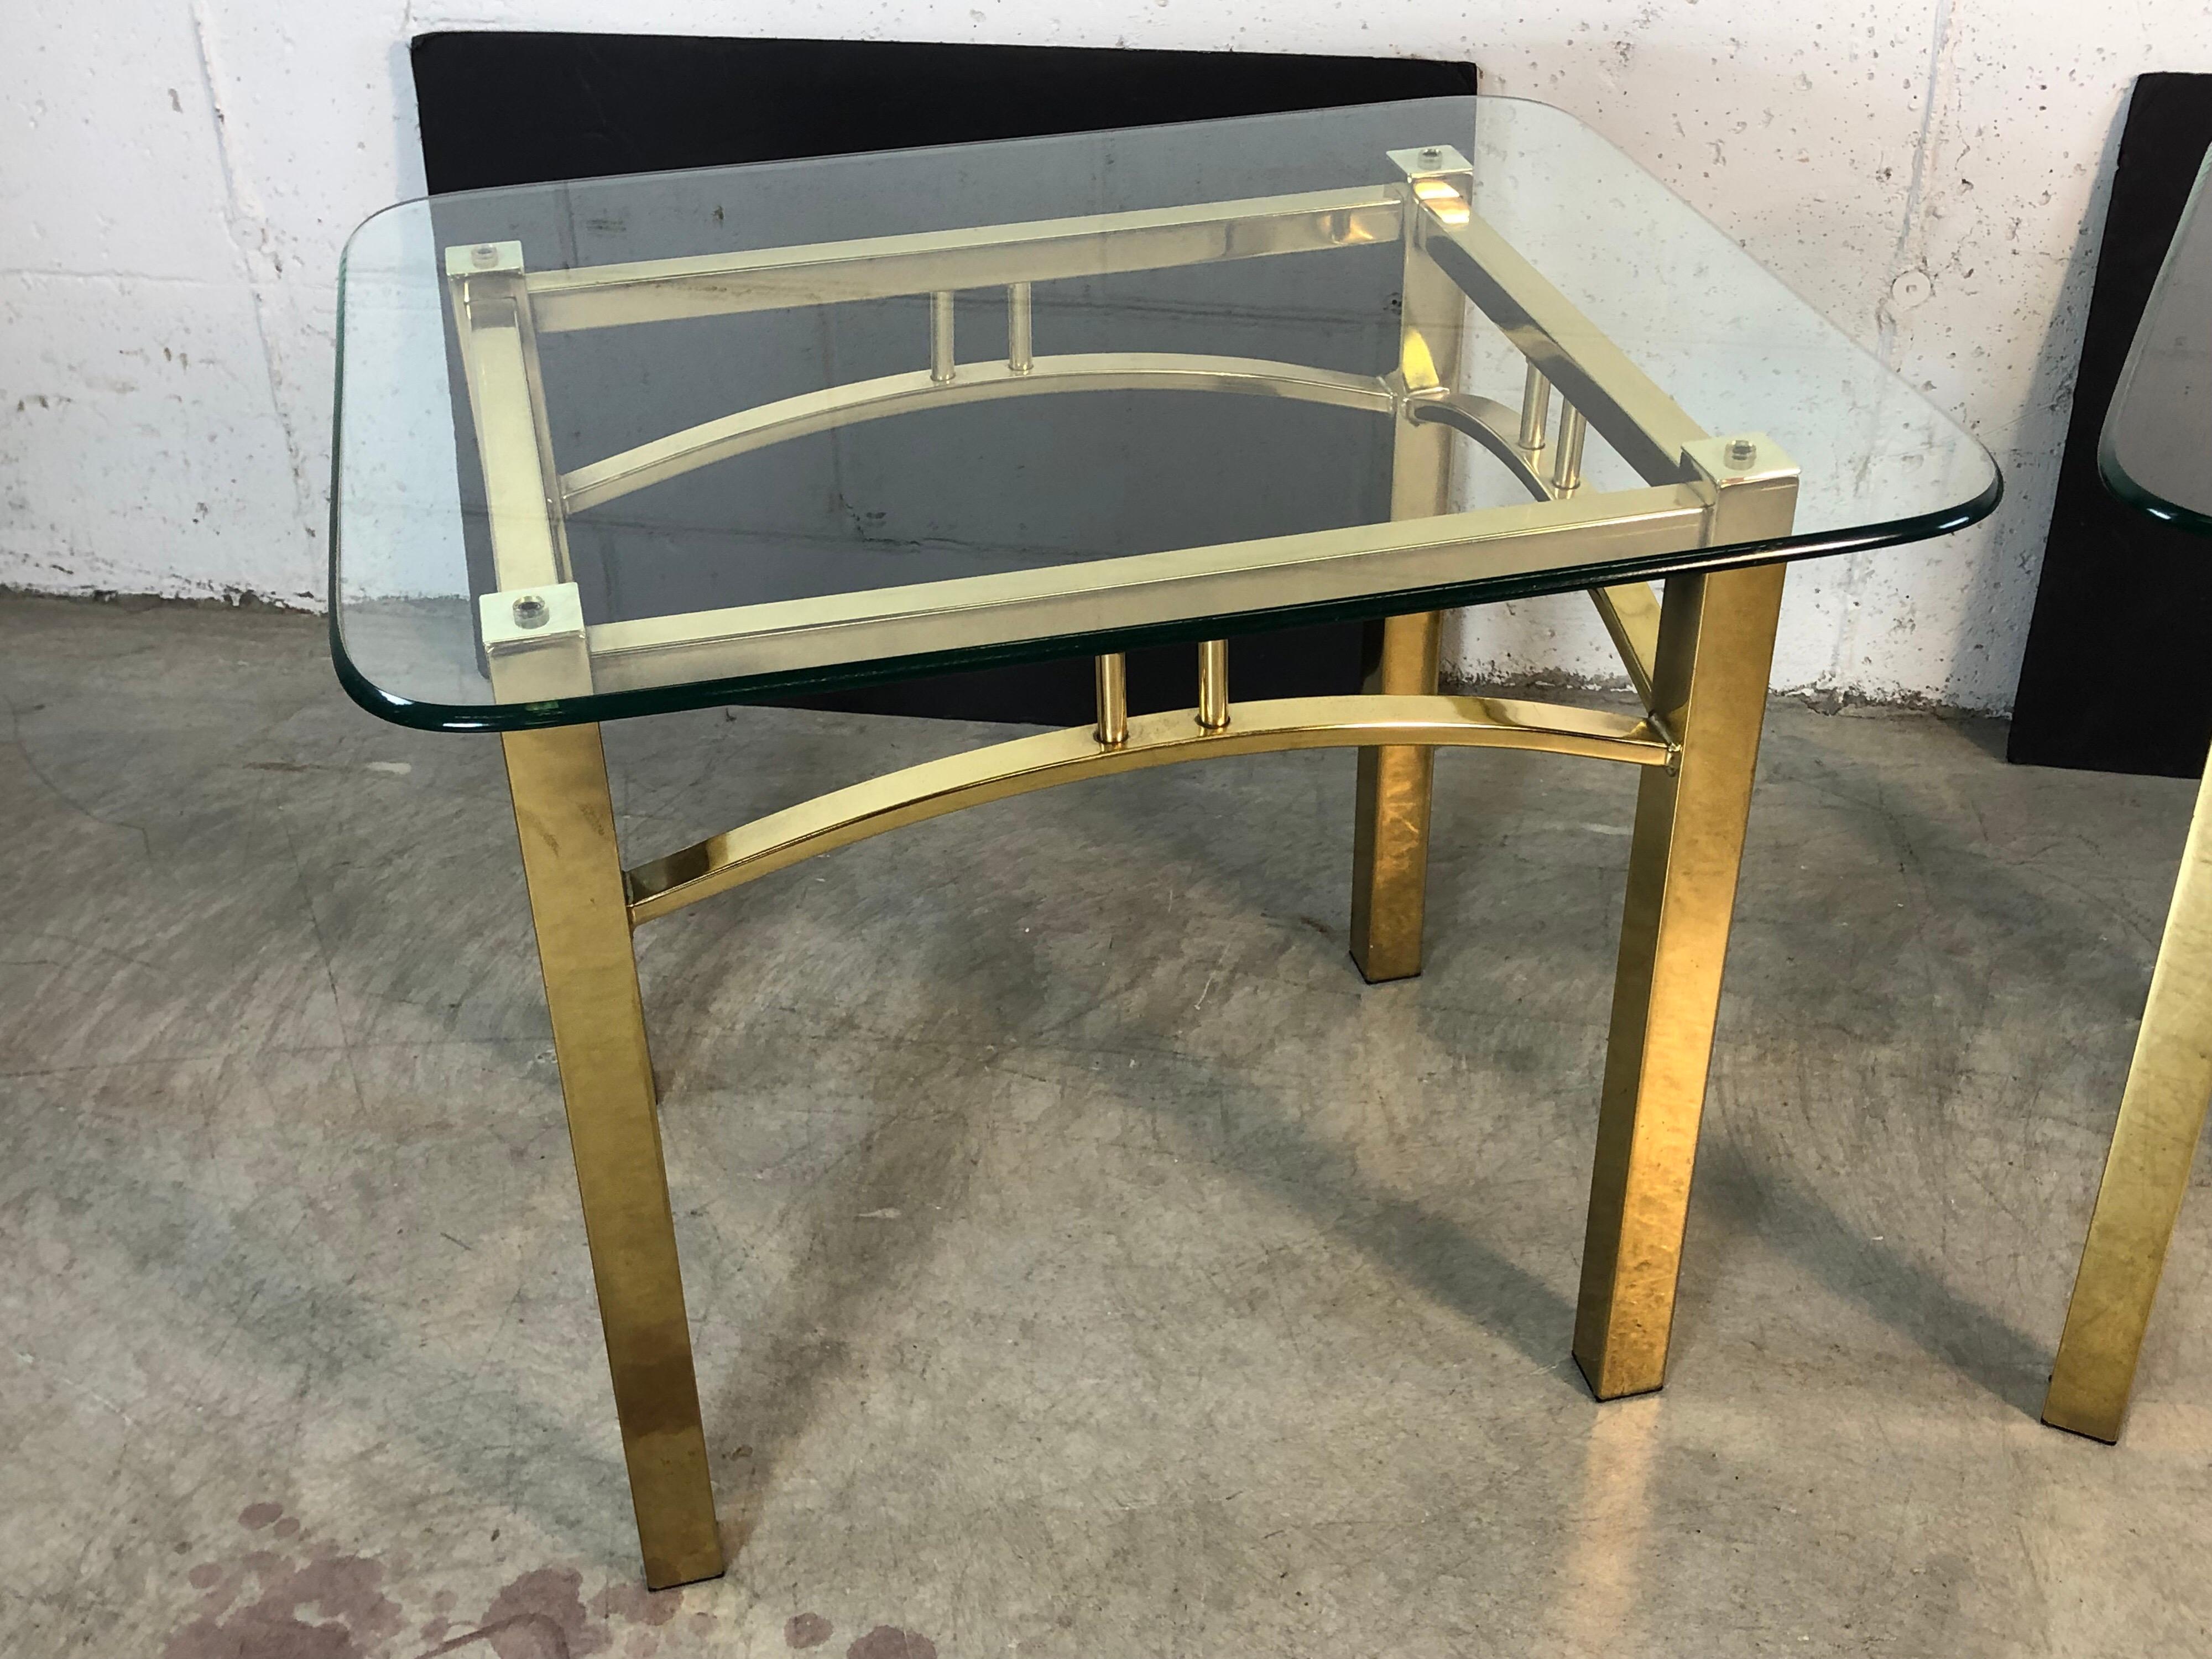 Hollywood Regency style pair of brass rectangular base side tables with glass tops. The tables are sturdy and have minimal wear to the glass. No maker’s mark.